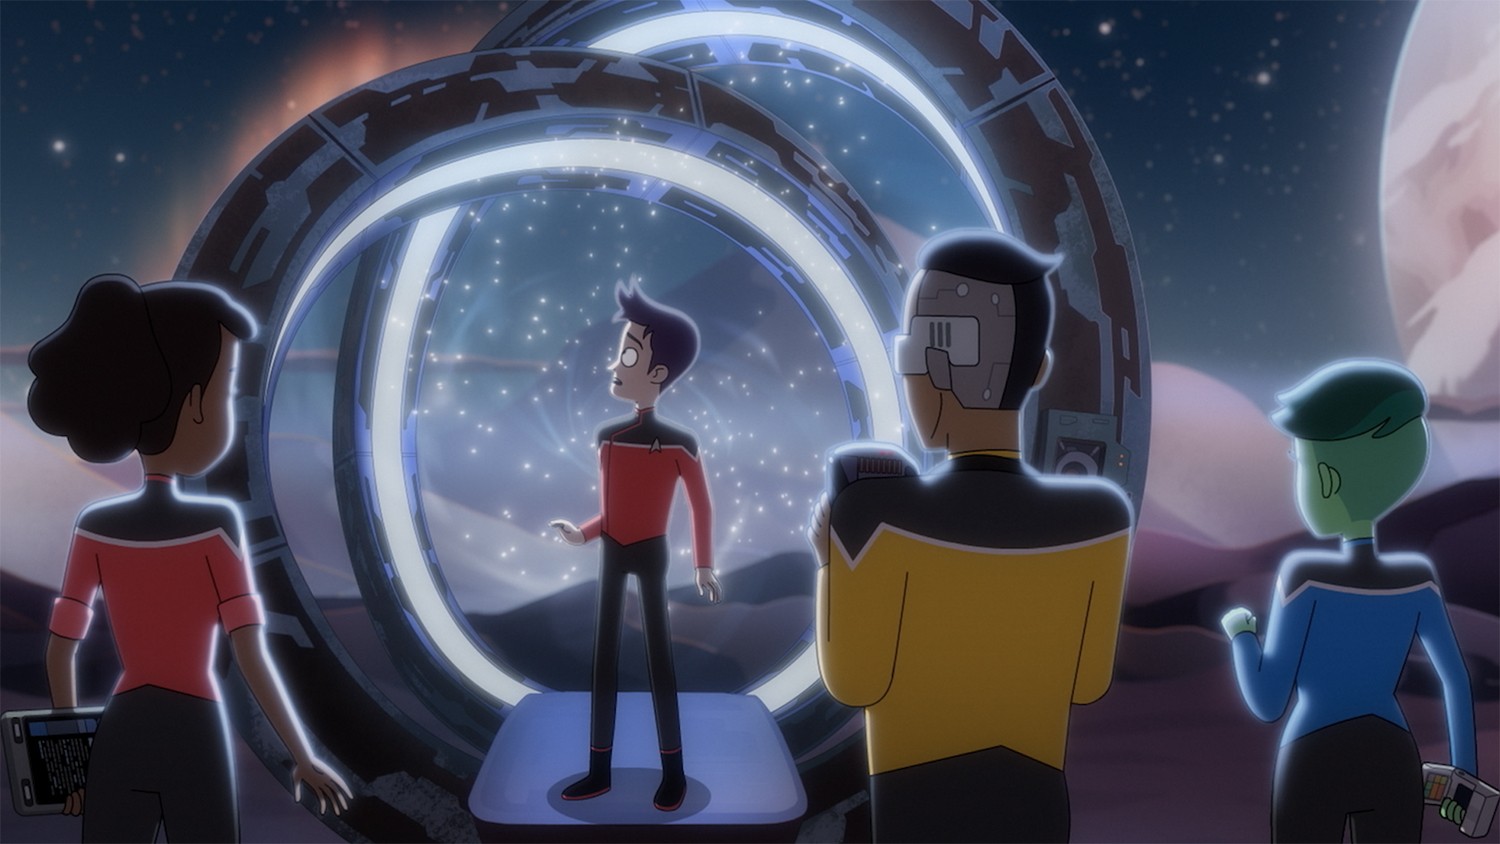 The opening animated sequence of the 'Lower Decks' episode of 'Strange New Worlds